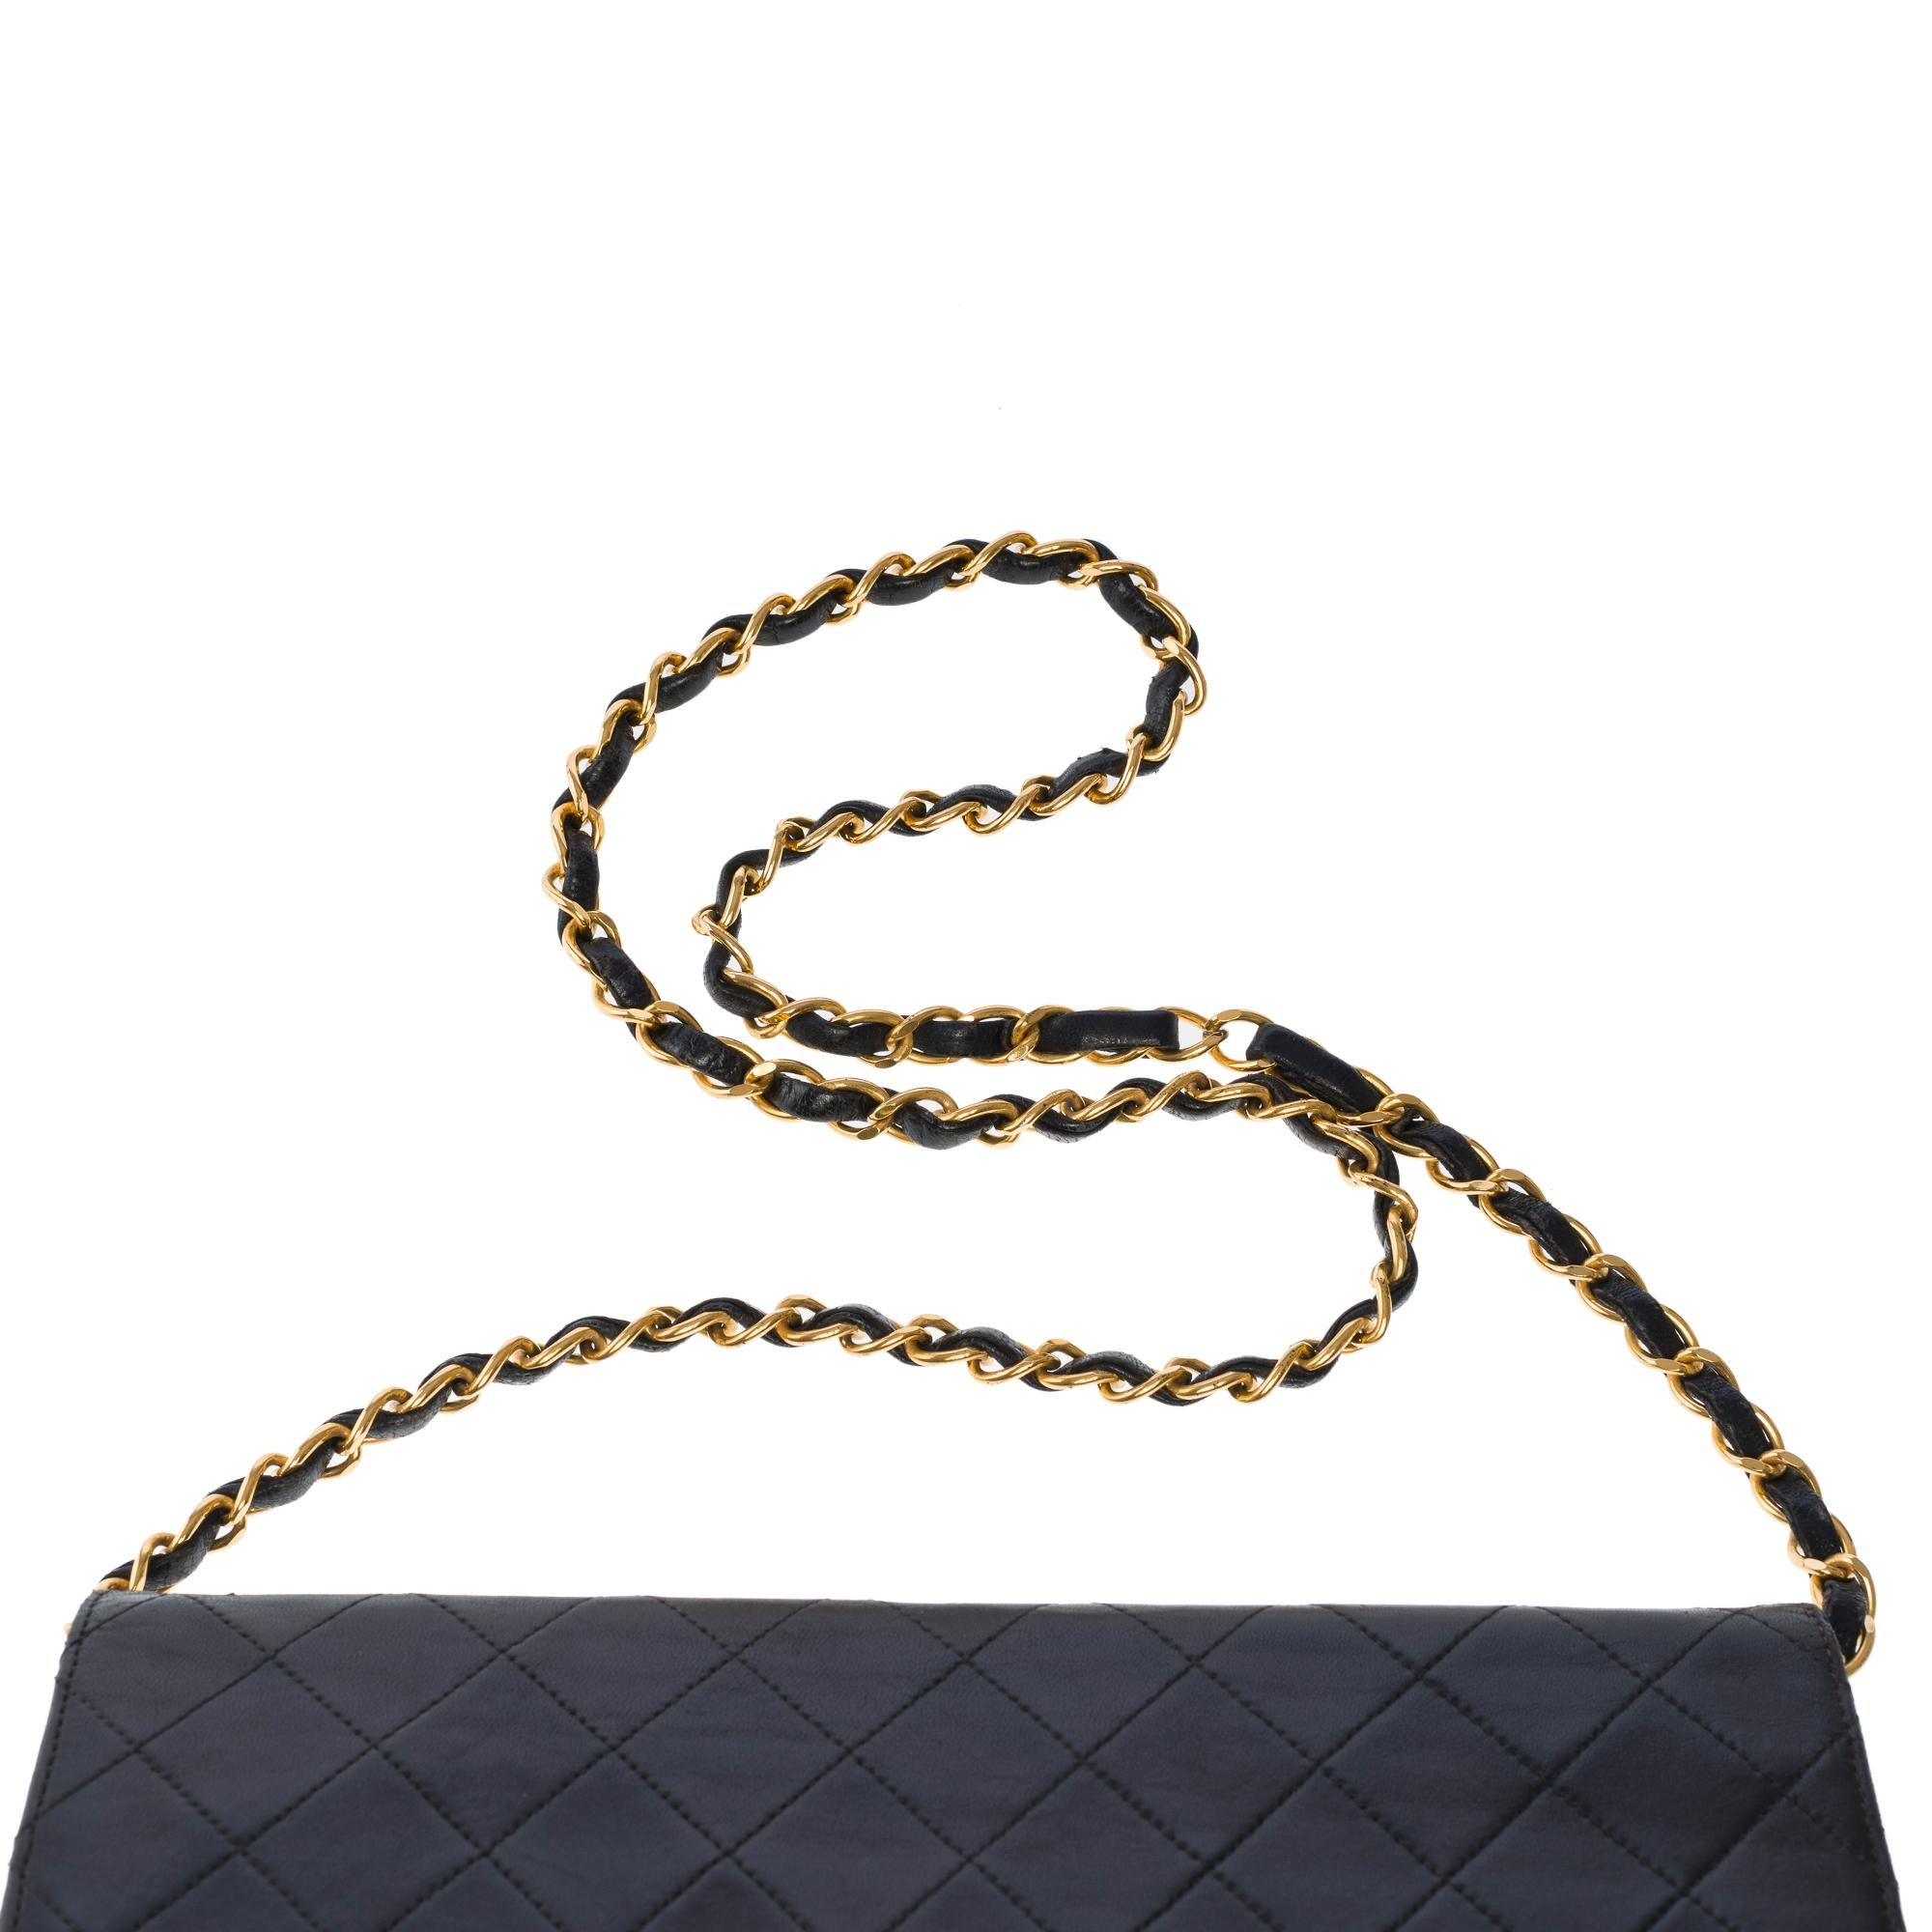 Chanel Timeless/Classic single flap shoulder bag in black quilted lambskin , GHW 5